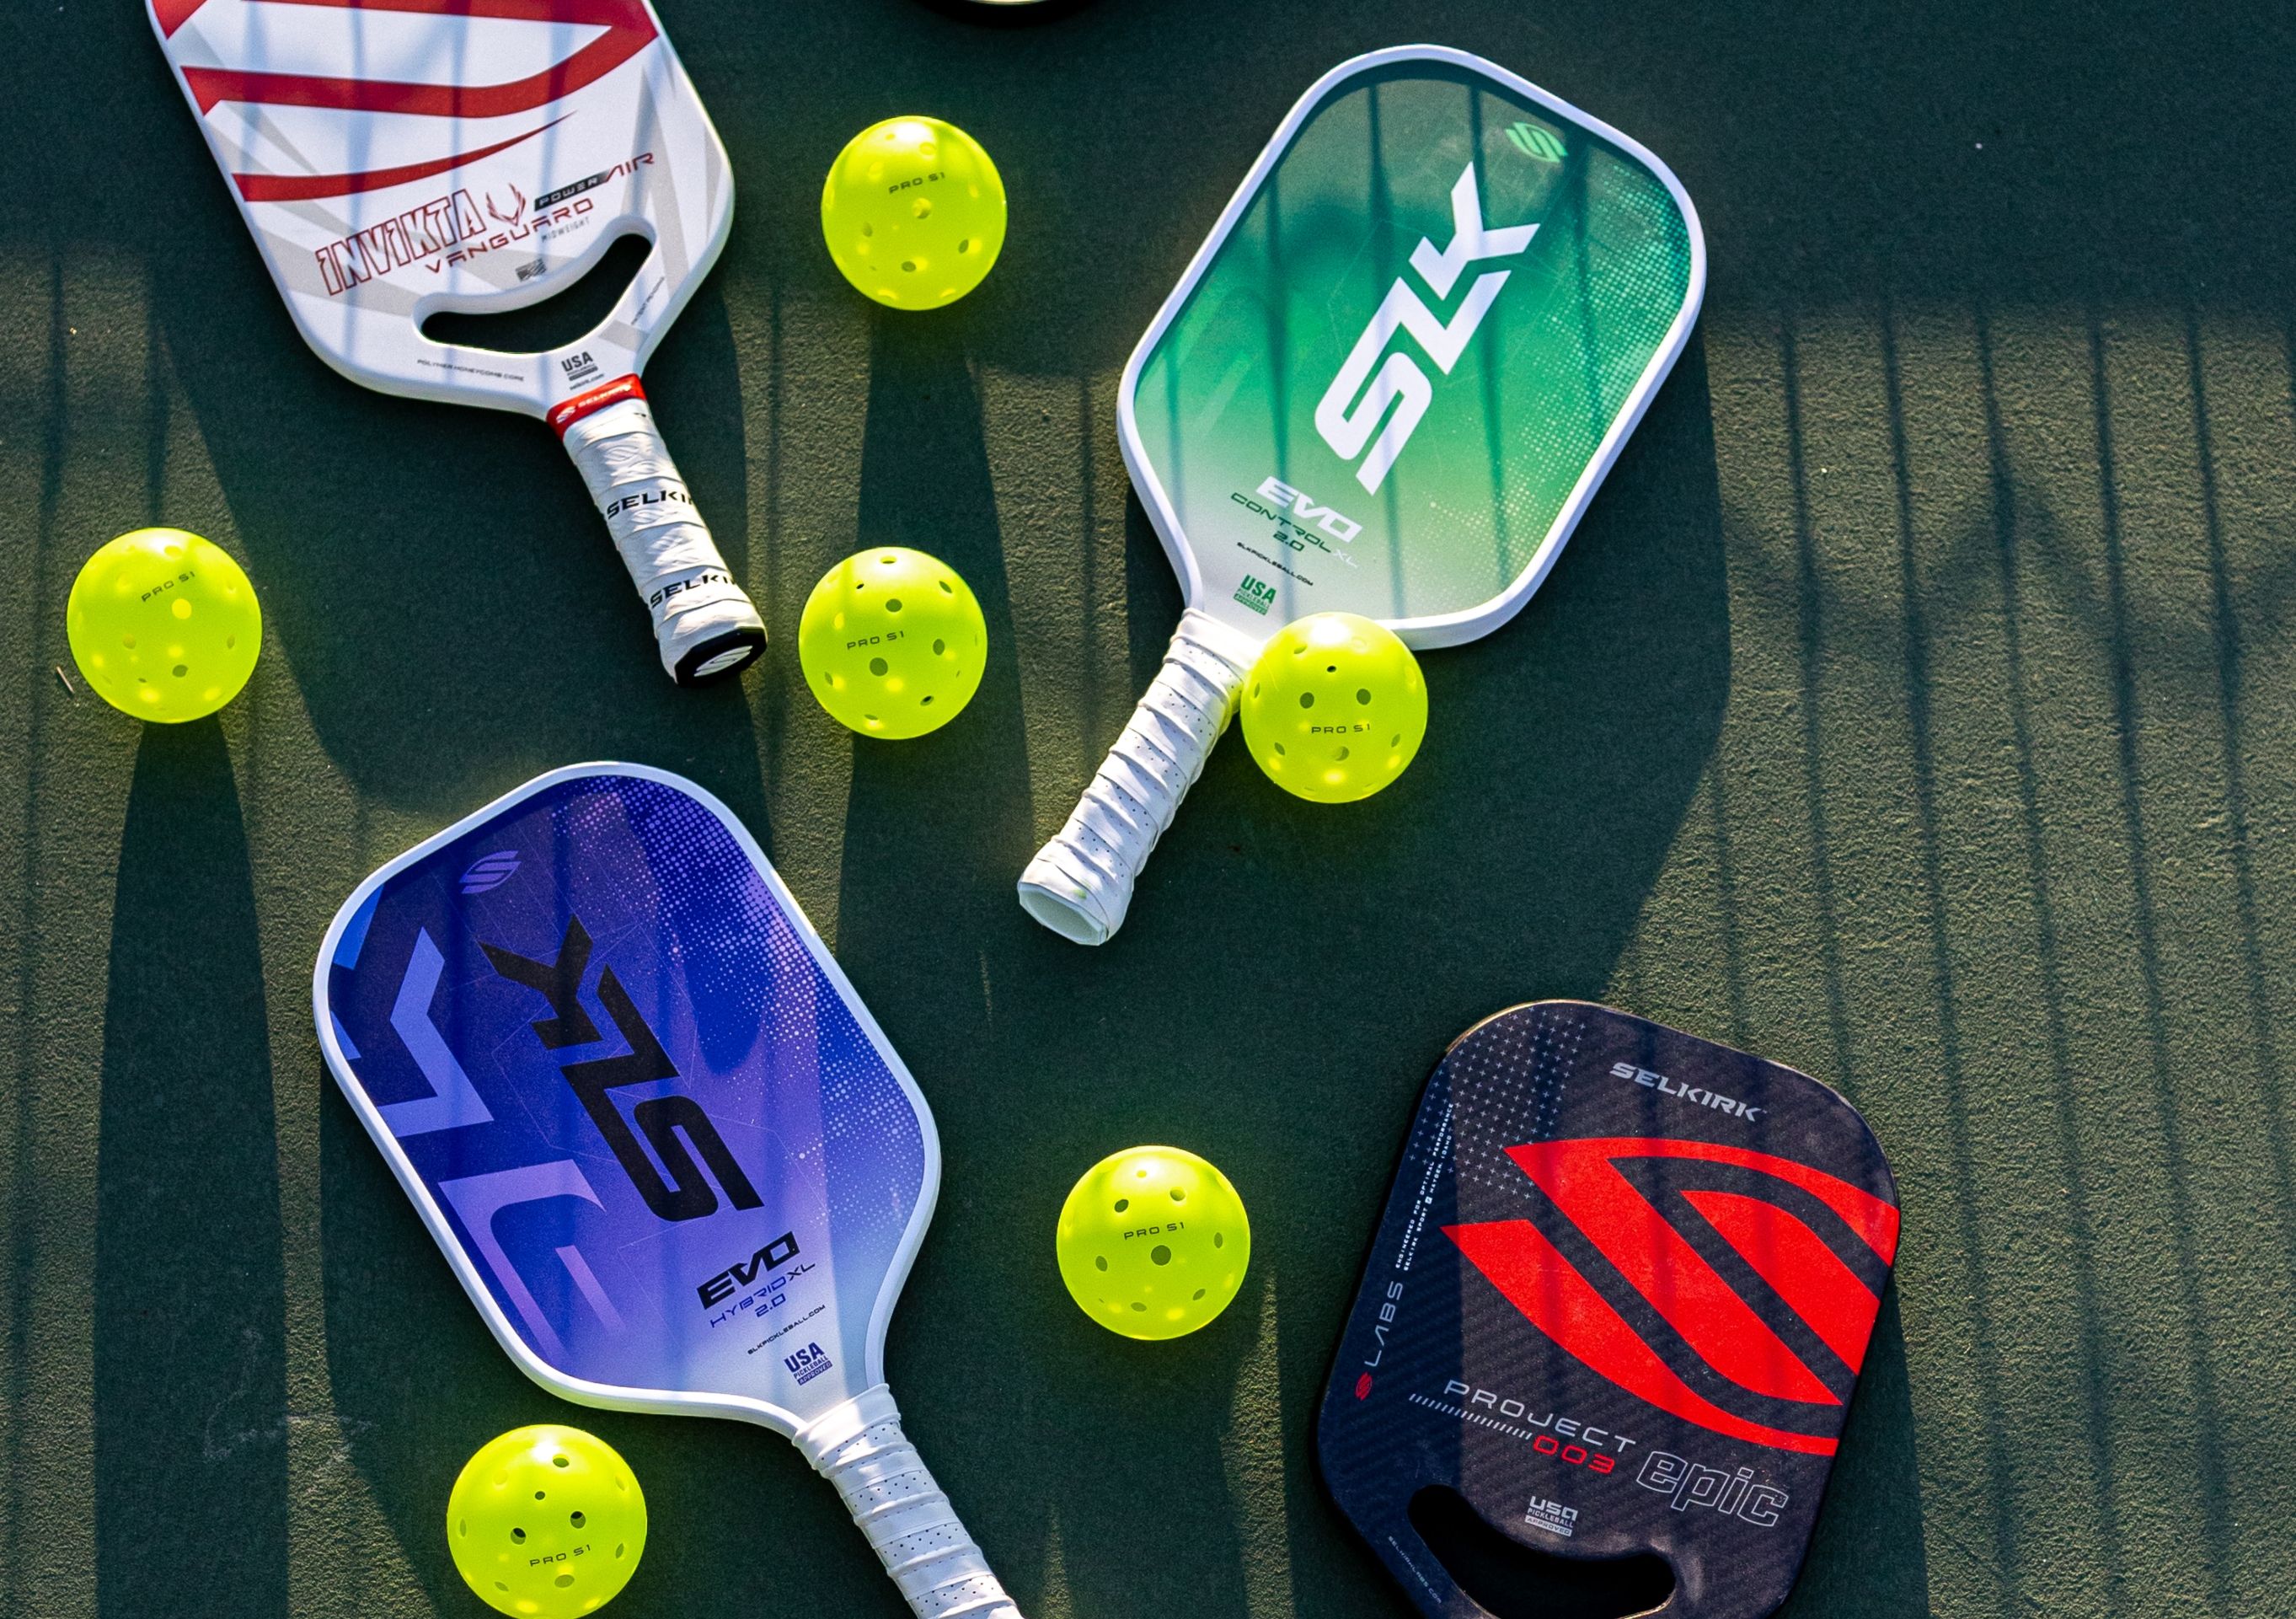 Once you understand more about how you play pickleball and what paddles can do, you will want to know the difference between a power or control pickleball paddle.